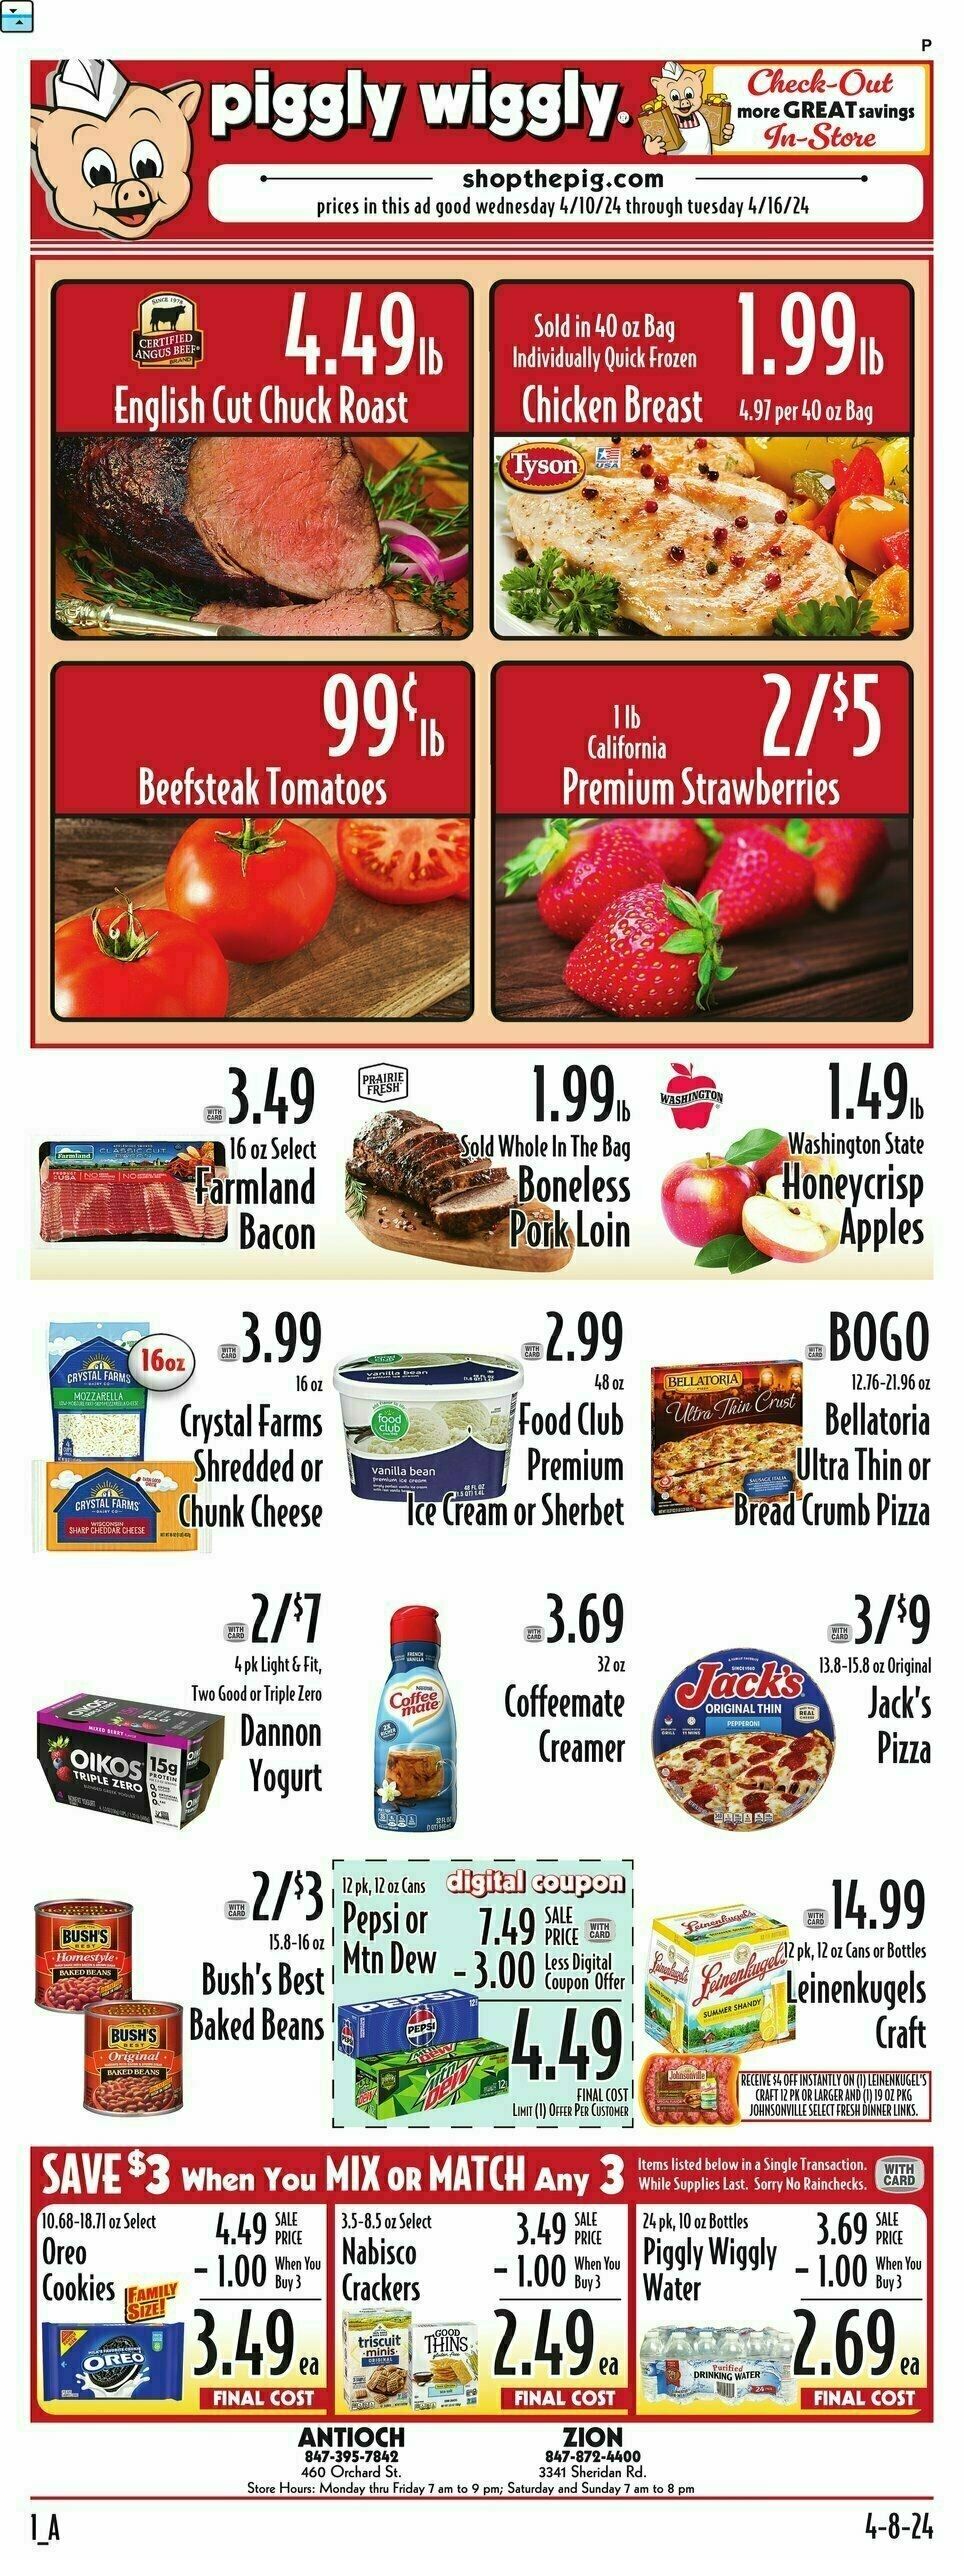 Piggly Wiggly Weekly Ad from April 10